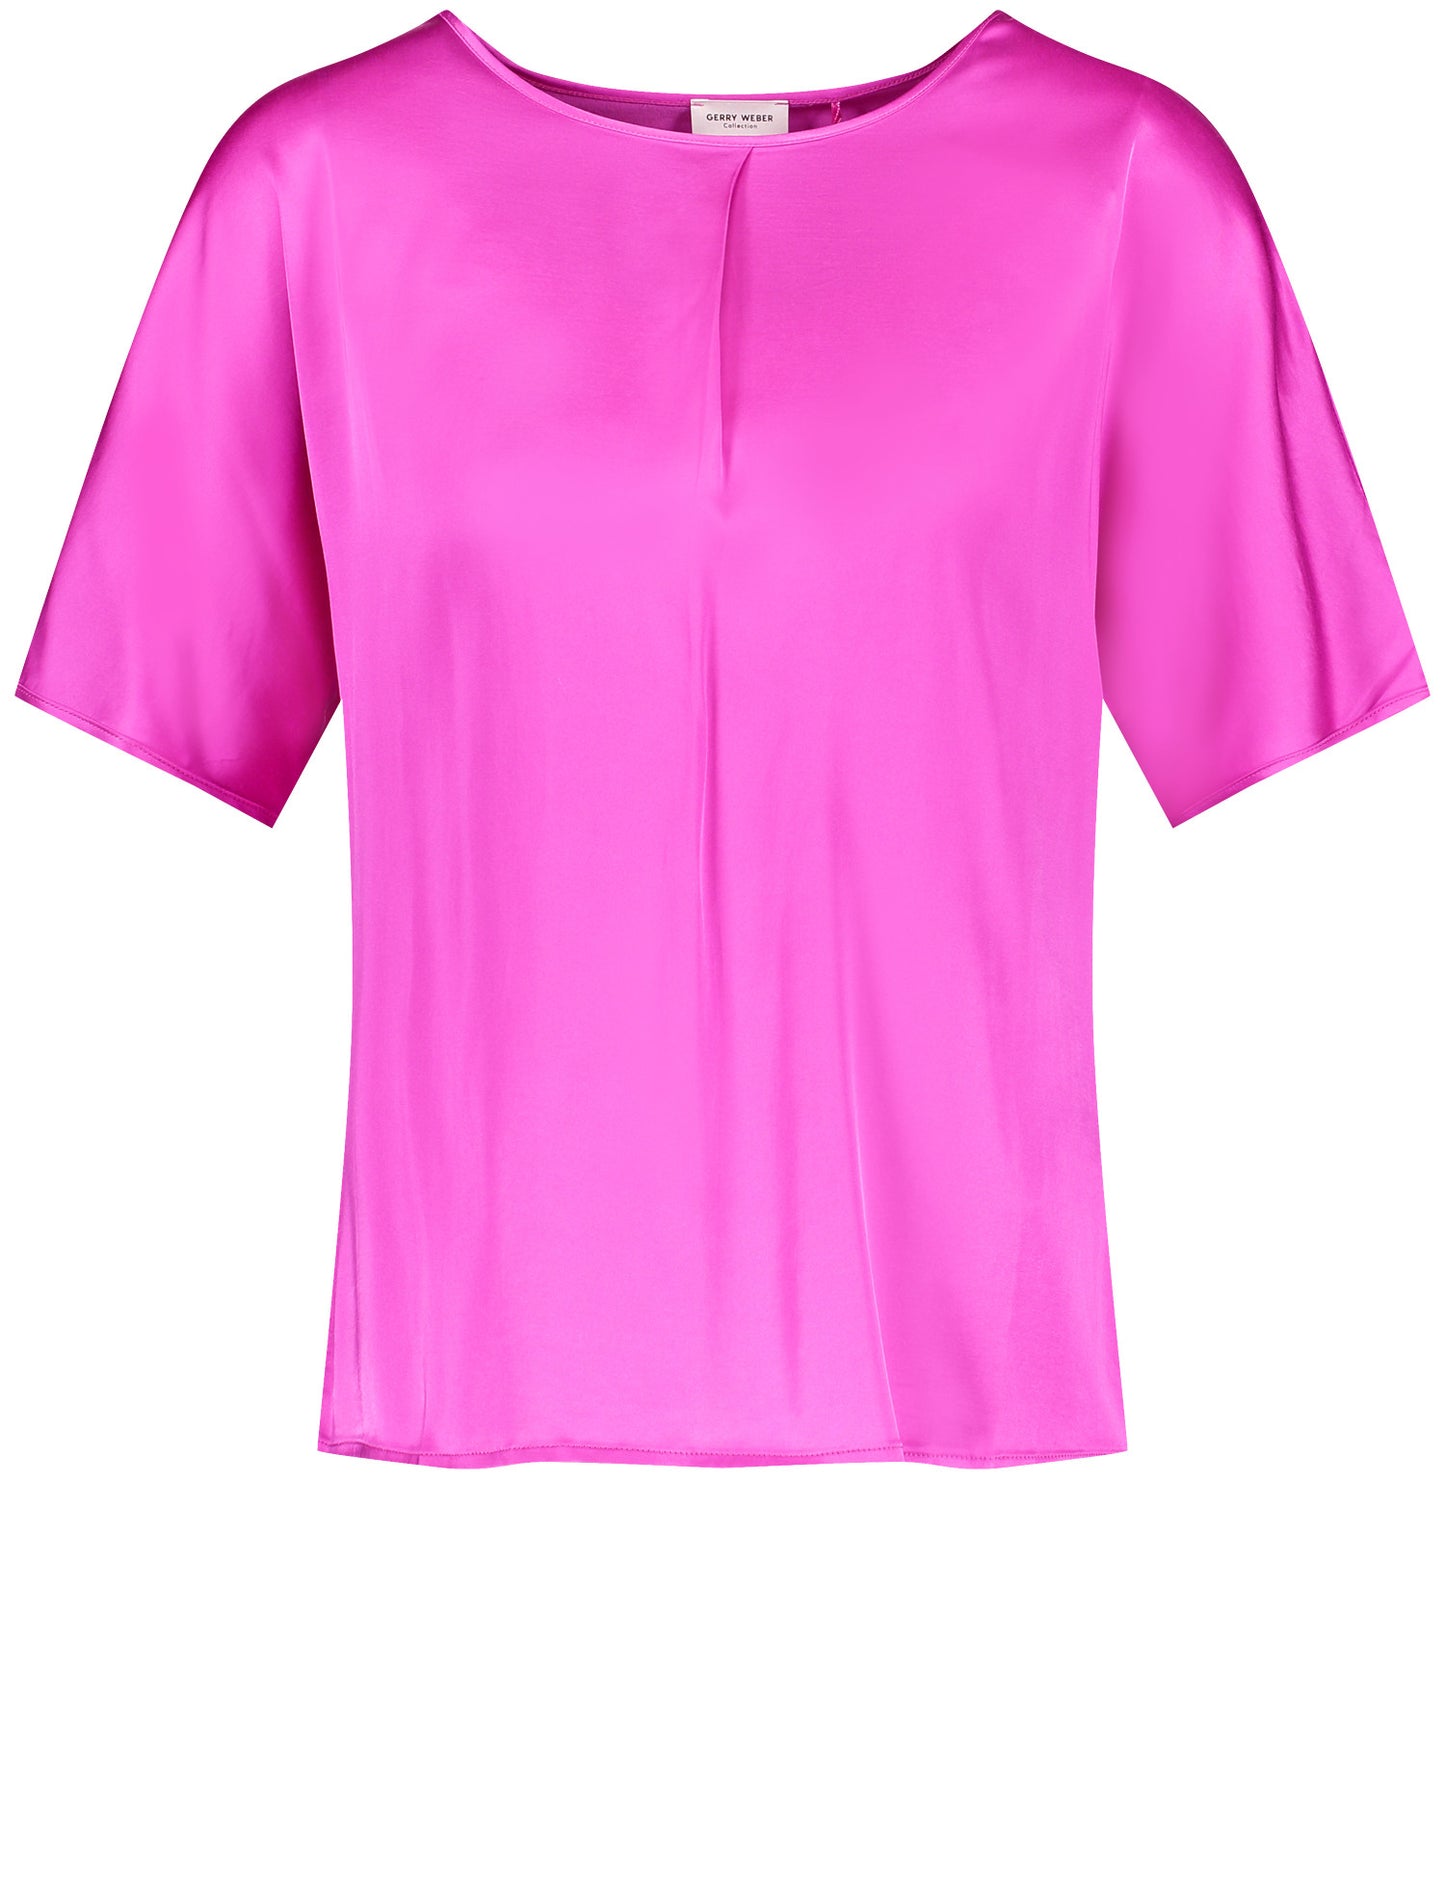 Blouse shirt with a pleat at the neckline